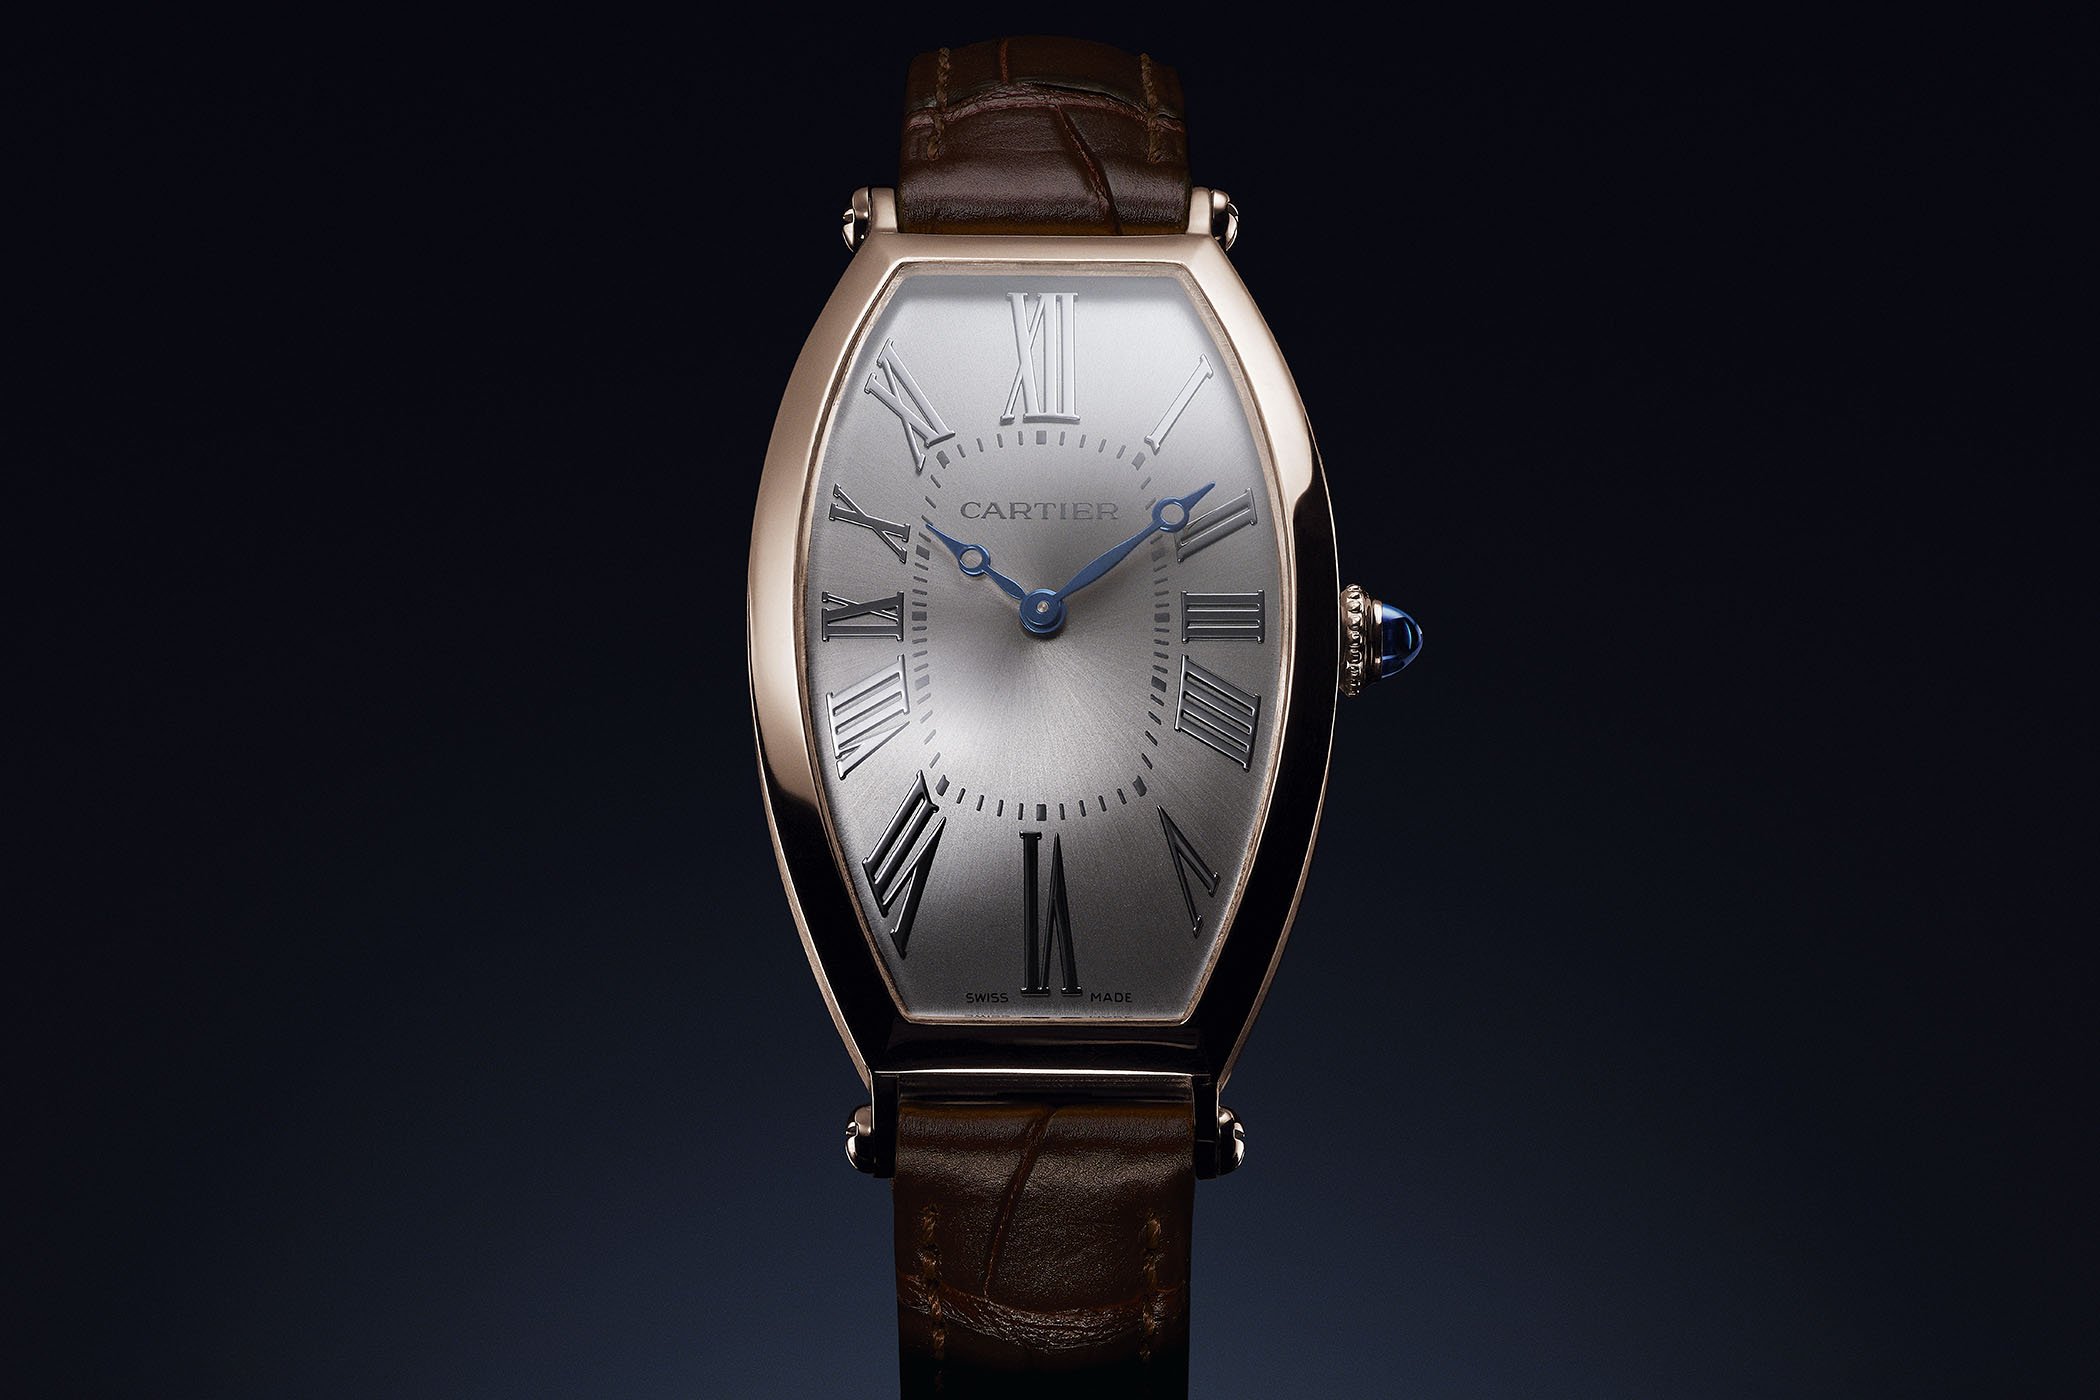 Pre-SIHH 2019 - Cartier Prive Collection, The Comaback of the Cartier Tonneau